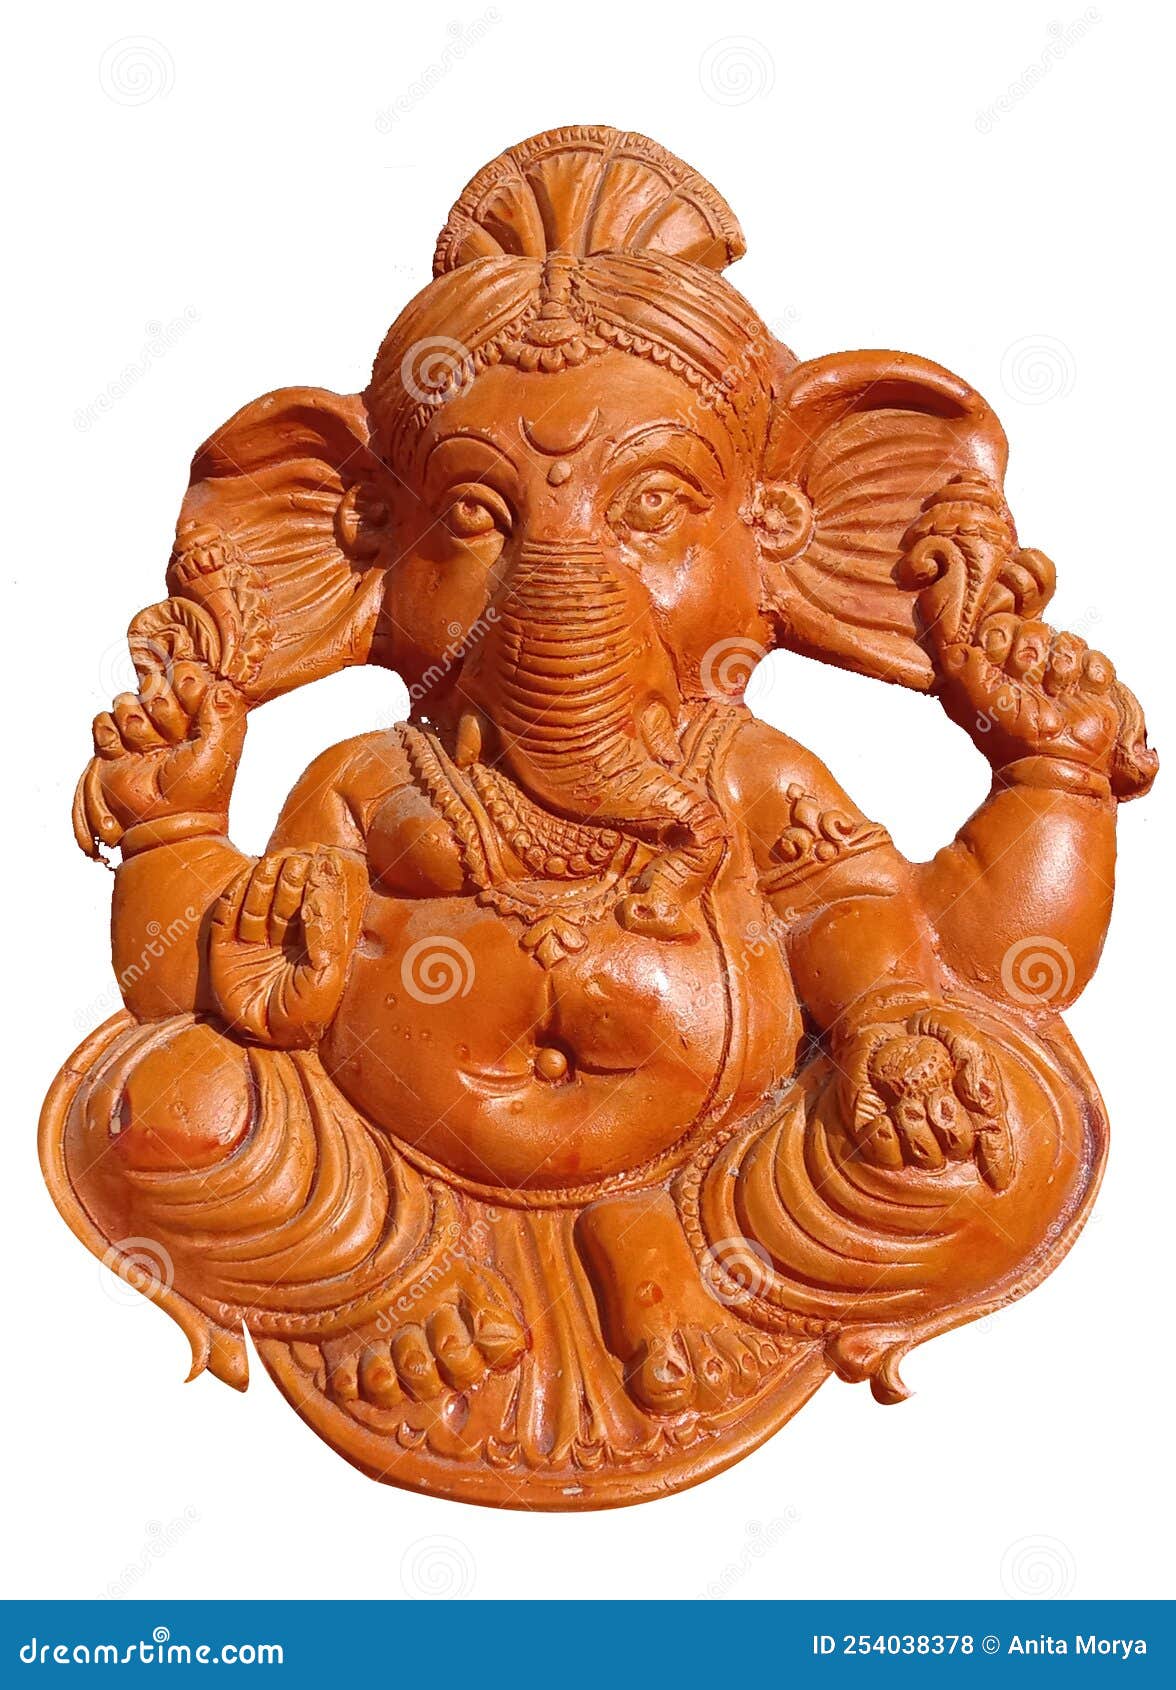 lord ganesh sculpture and white background